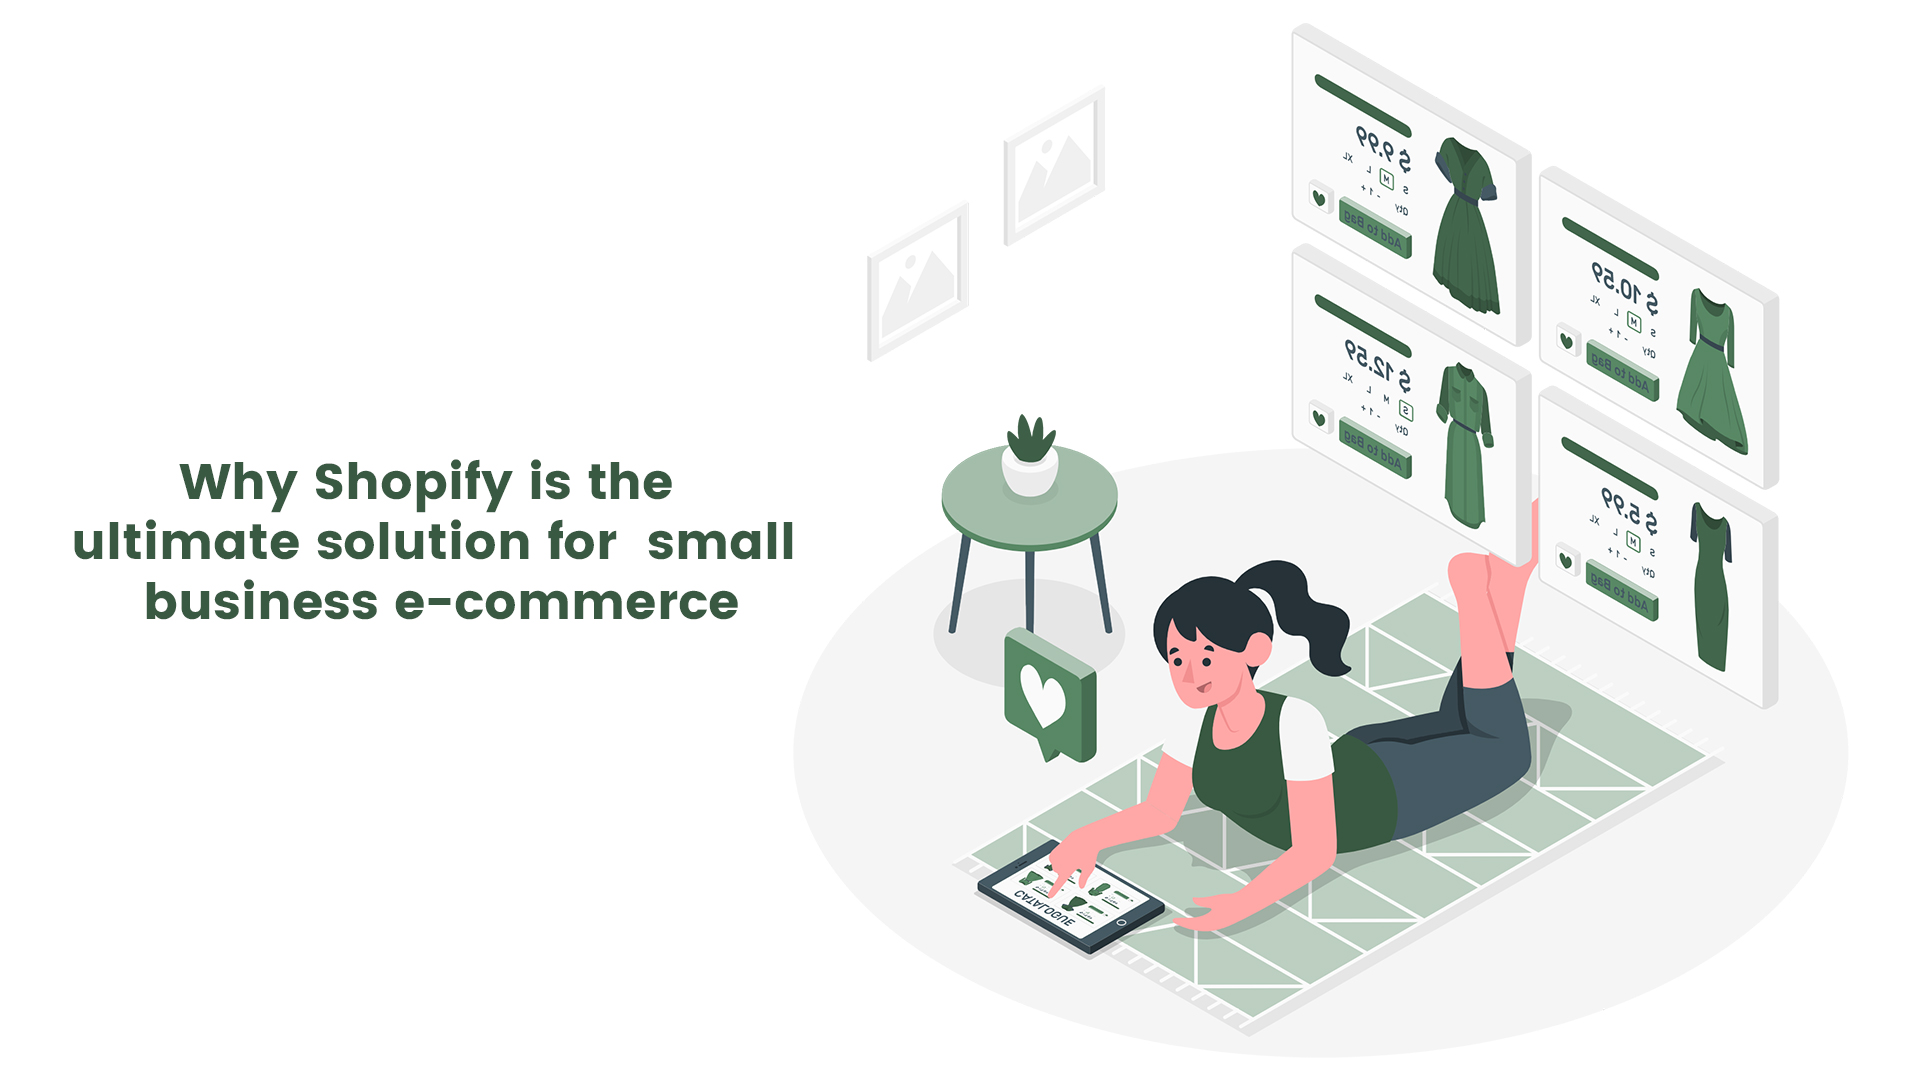 Why Shopify is the perfect CMS for small businesses